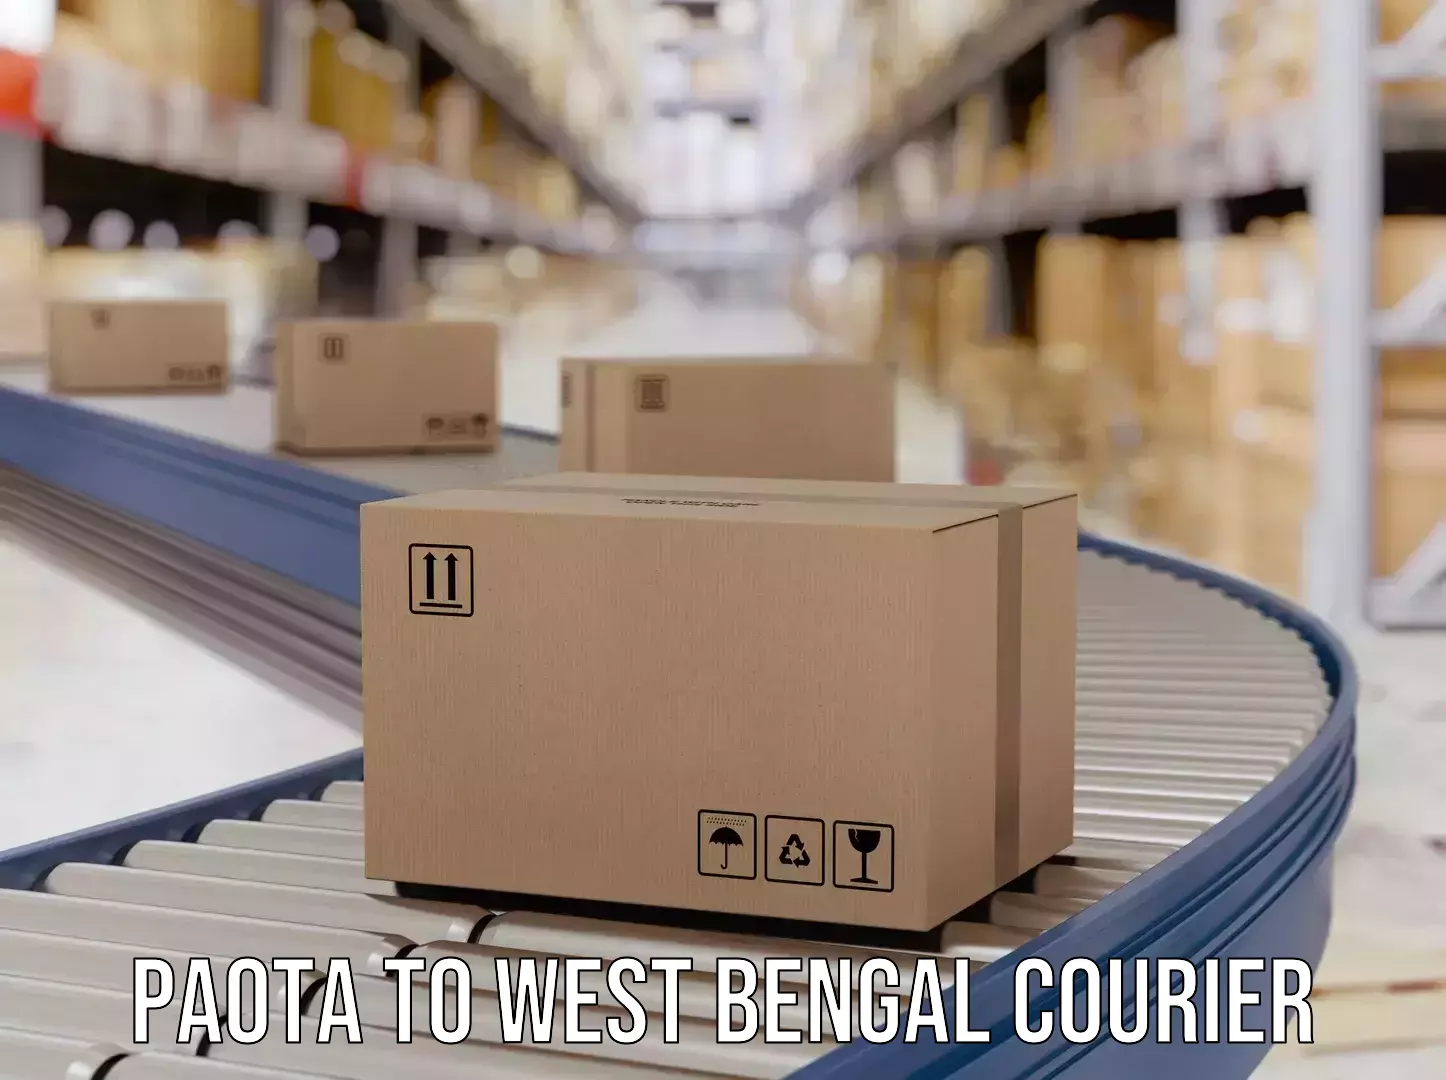 Modern delivery technologies Paota to West Bengal